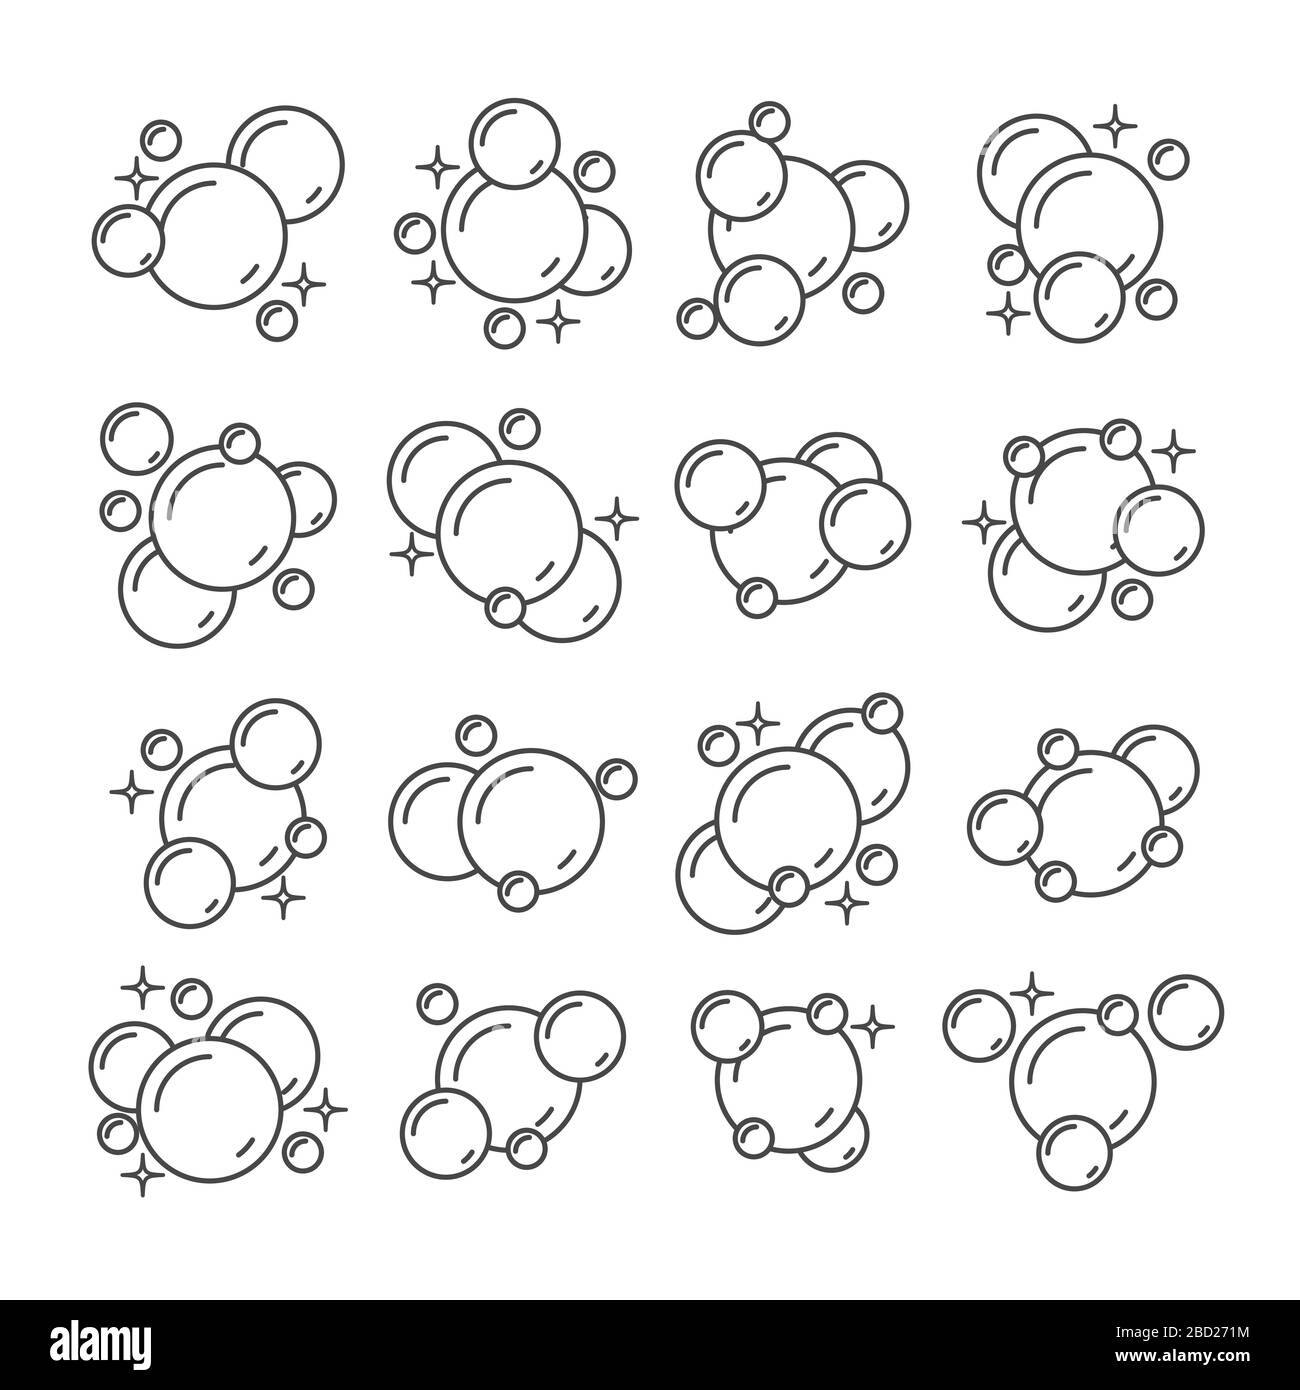 Outline underwater bubbles icons Stock Vector